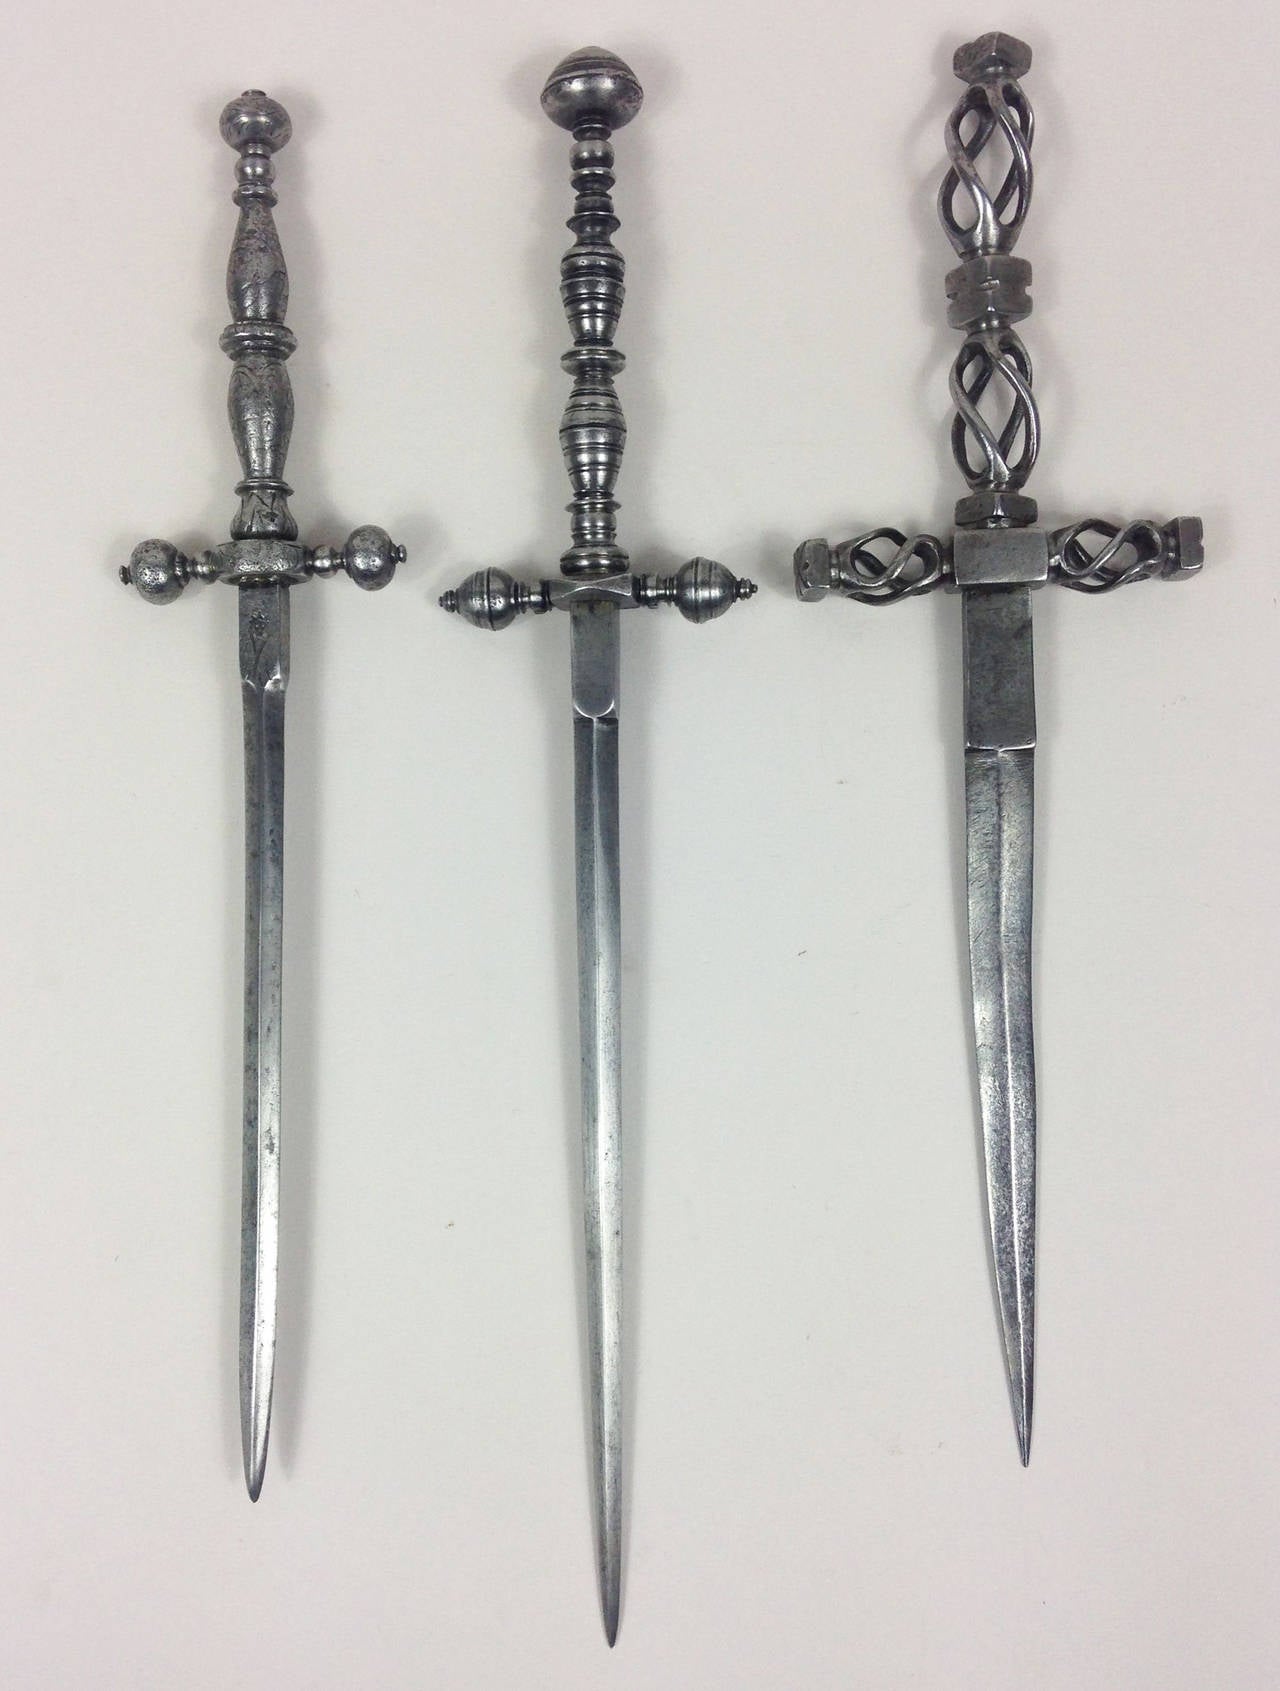 A fine group of three all-steel Italian daggers.

Each one different, varying in periods and hilt designs but of traditional form. The latest being circa 1850.

Measuring (left to right): 26, 29.5 and 26 cm. Sizes stated below are for the